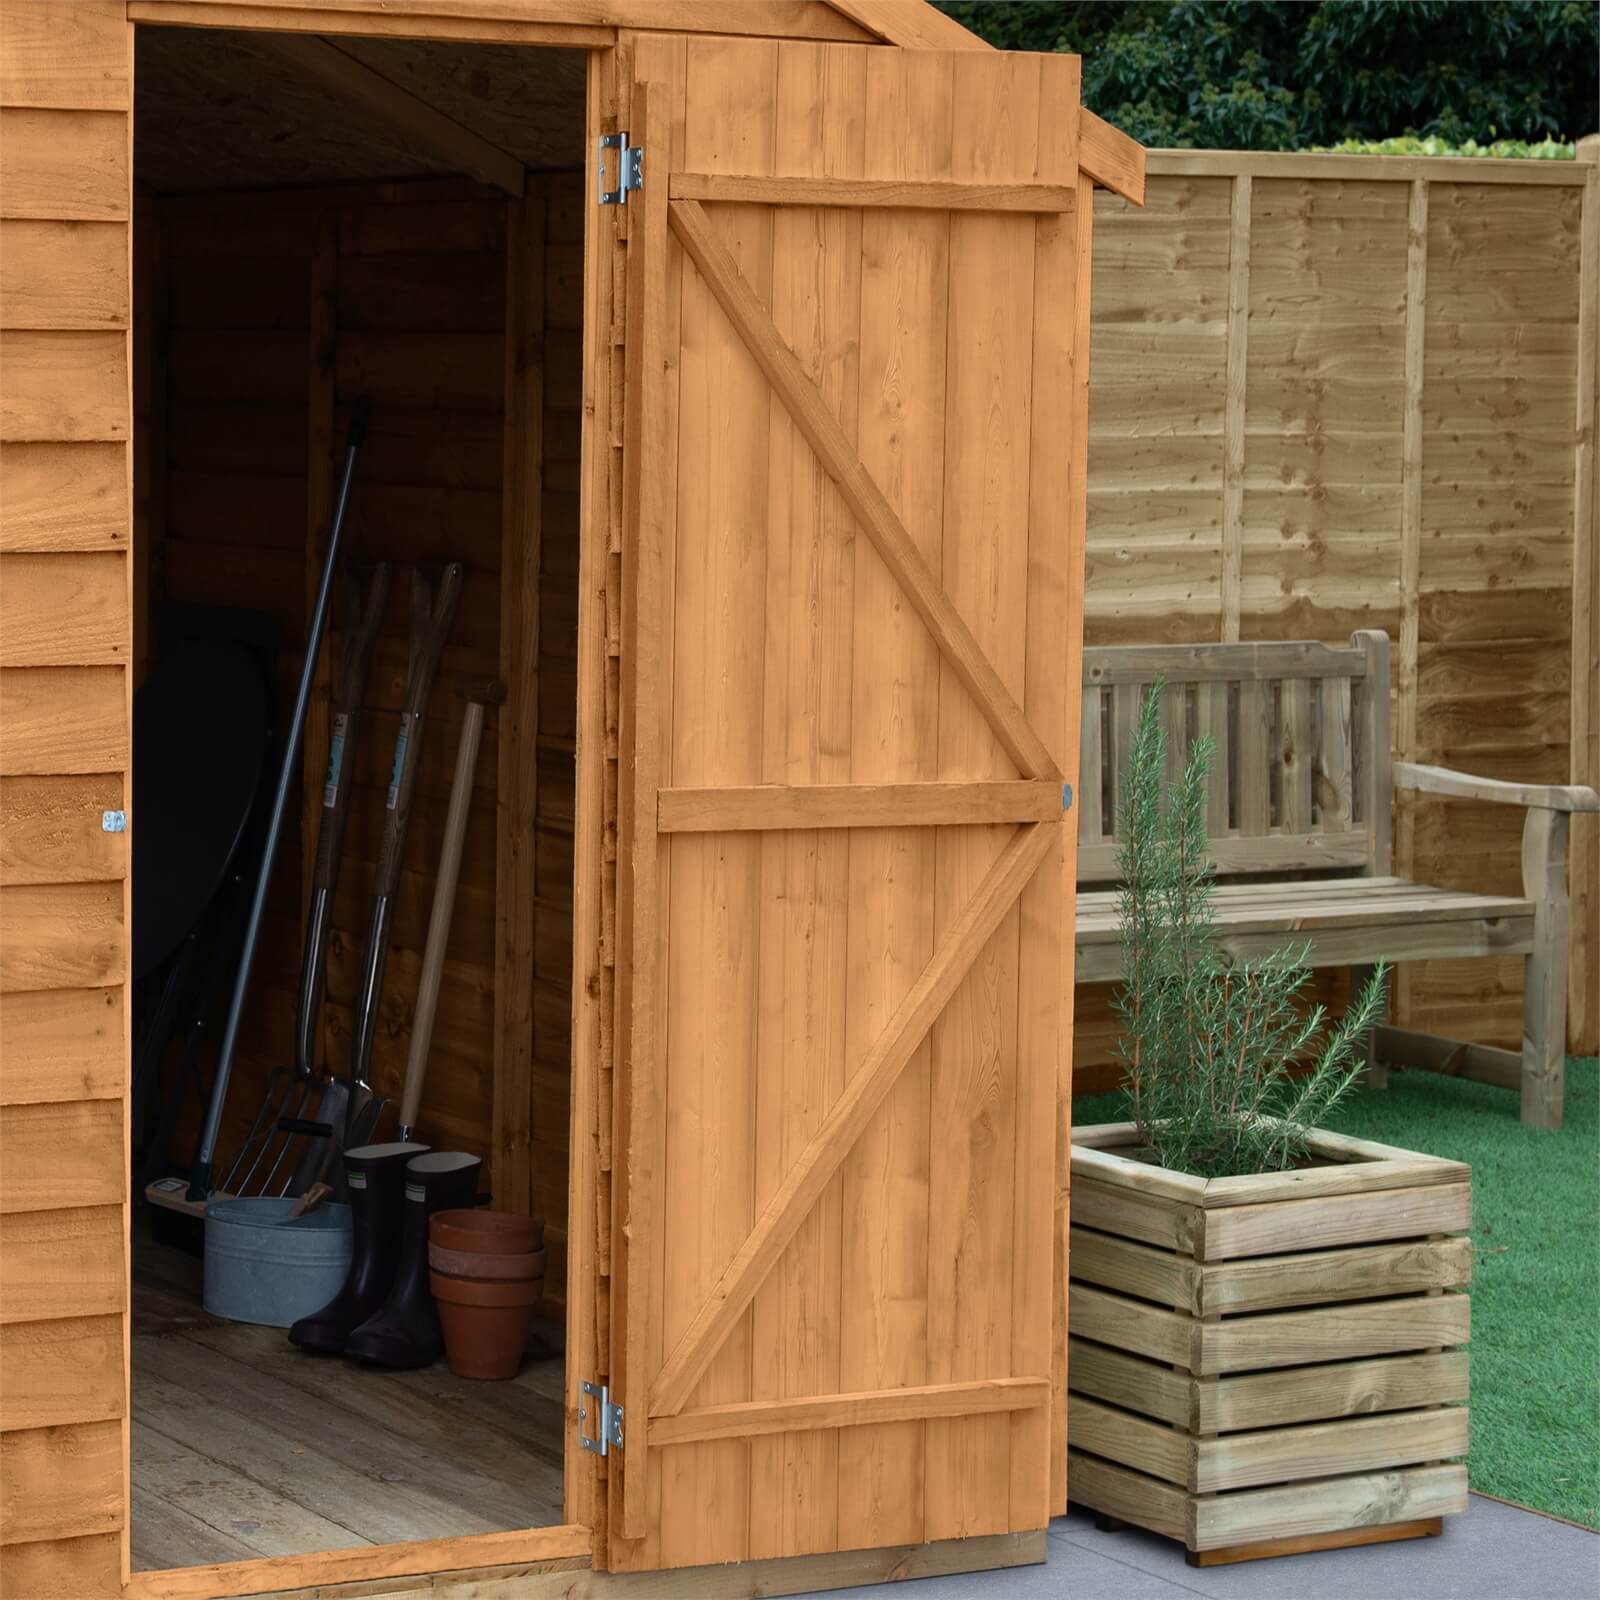 5x3 Forest Overlap Dip Treated Apex Shed - No Window